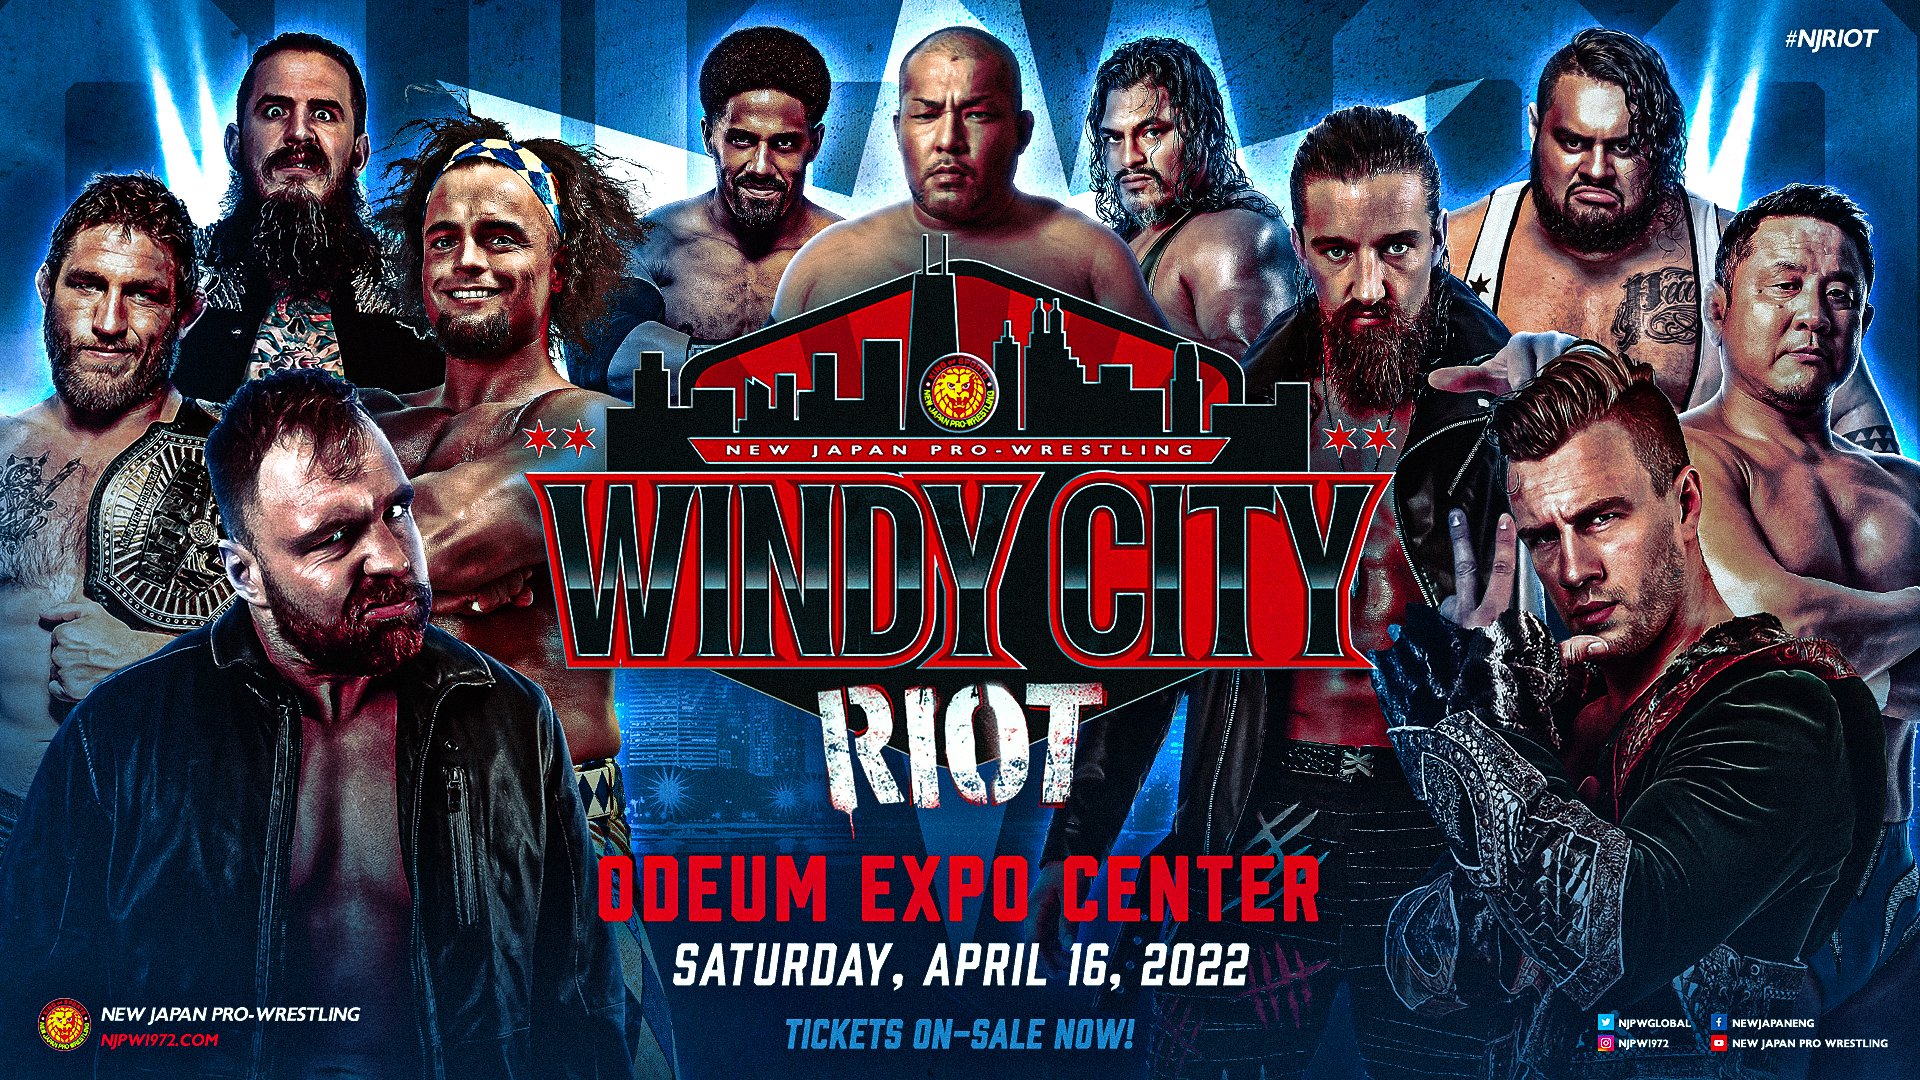 NJPW Issues Apology For Windy City Riot Streaming Issues